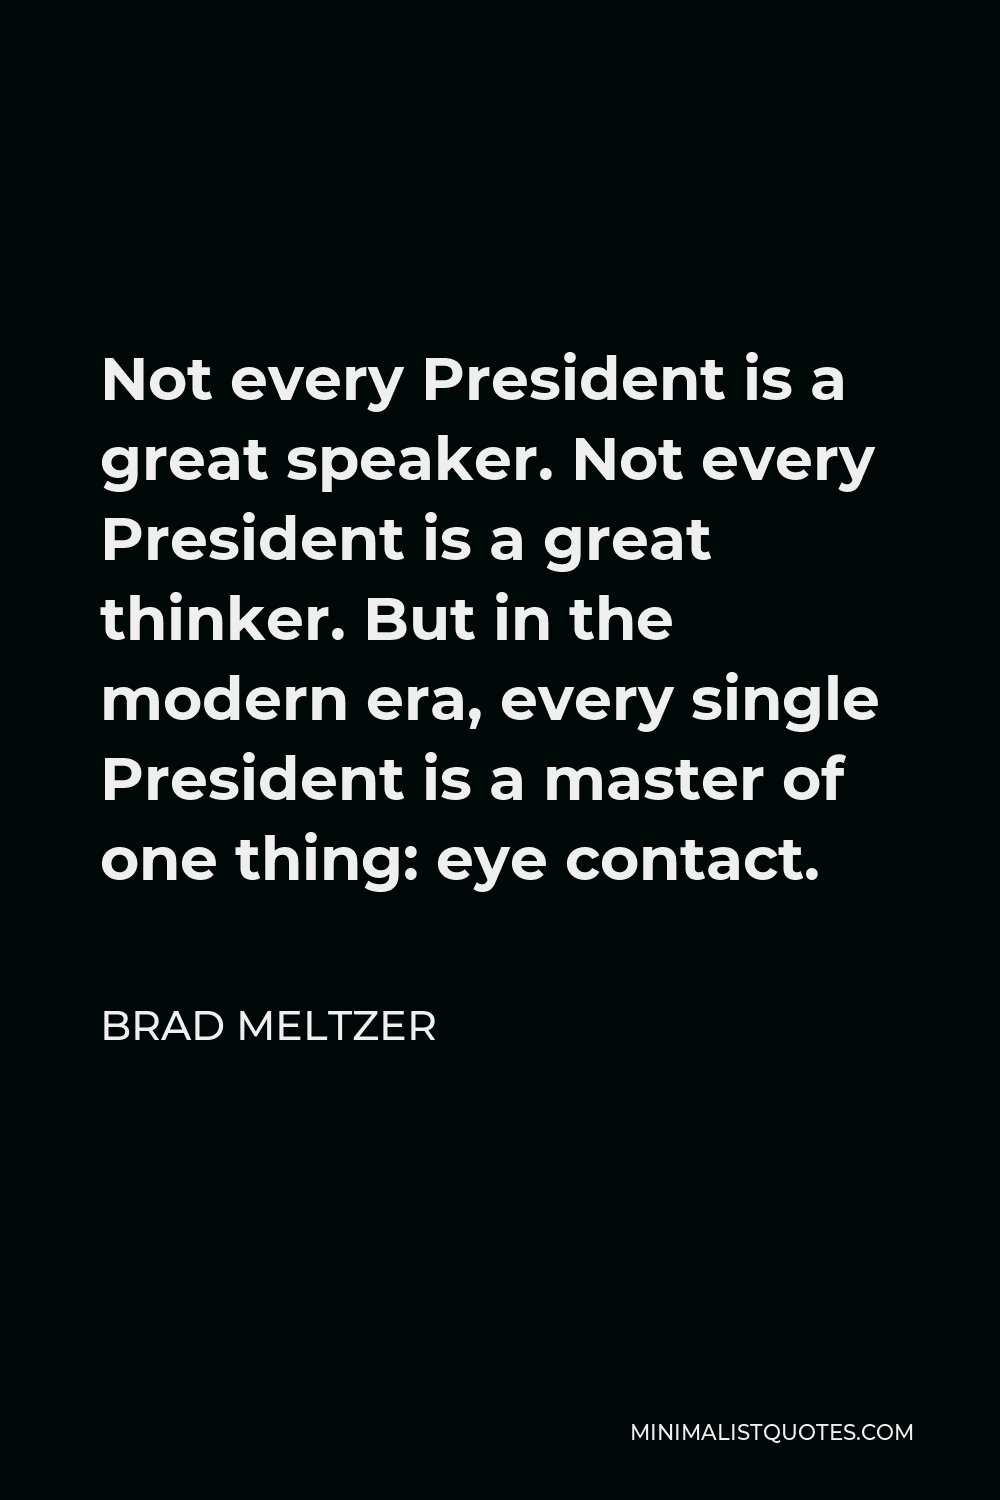 Brad Meltzer Quote - Not every President is a great speaker. Not every President is a great thinker. But in the modern era, every single President is a master of one thing: eye contact.